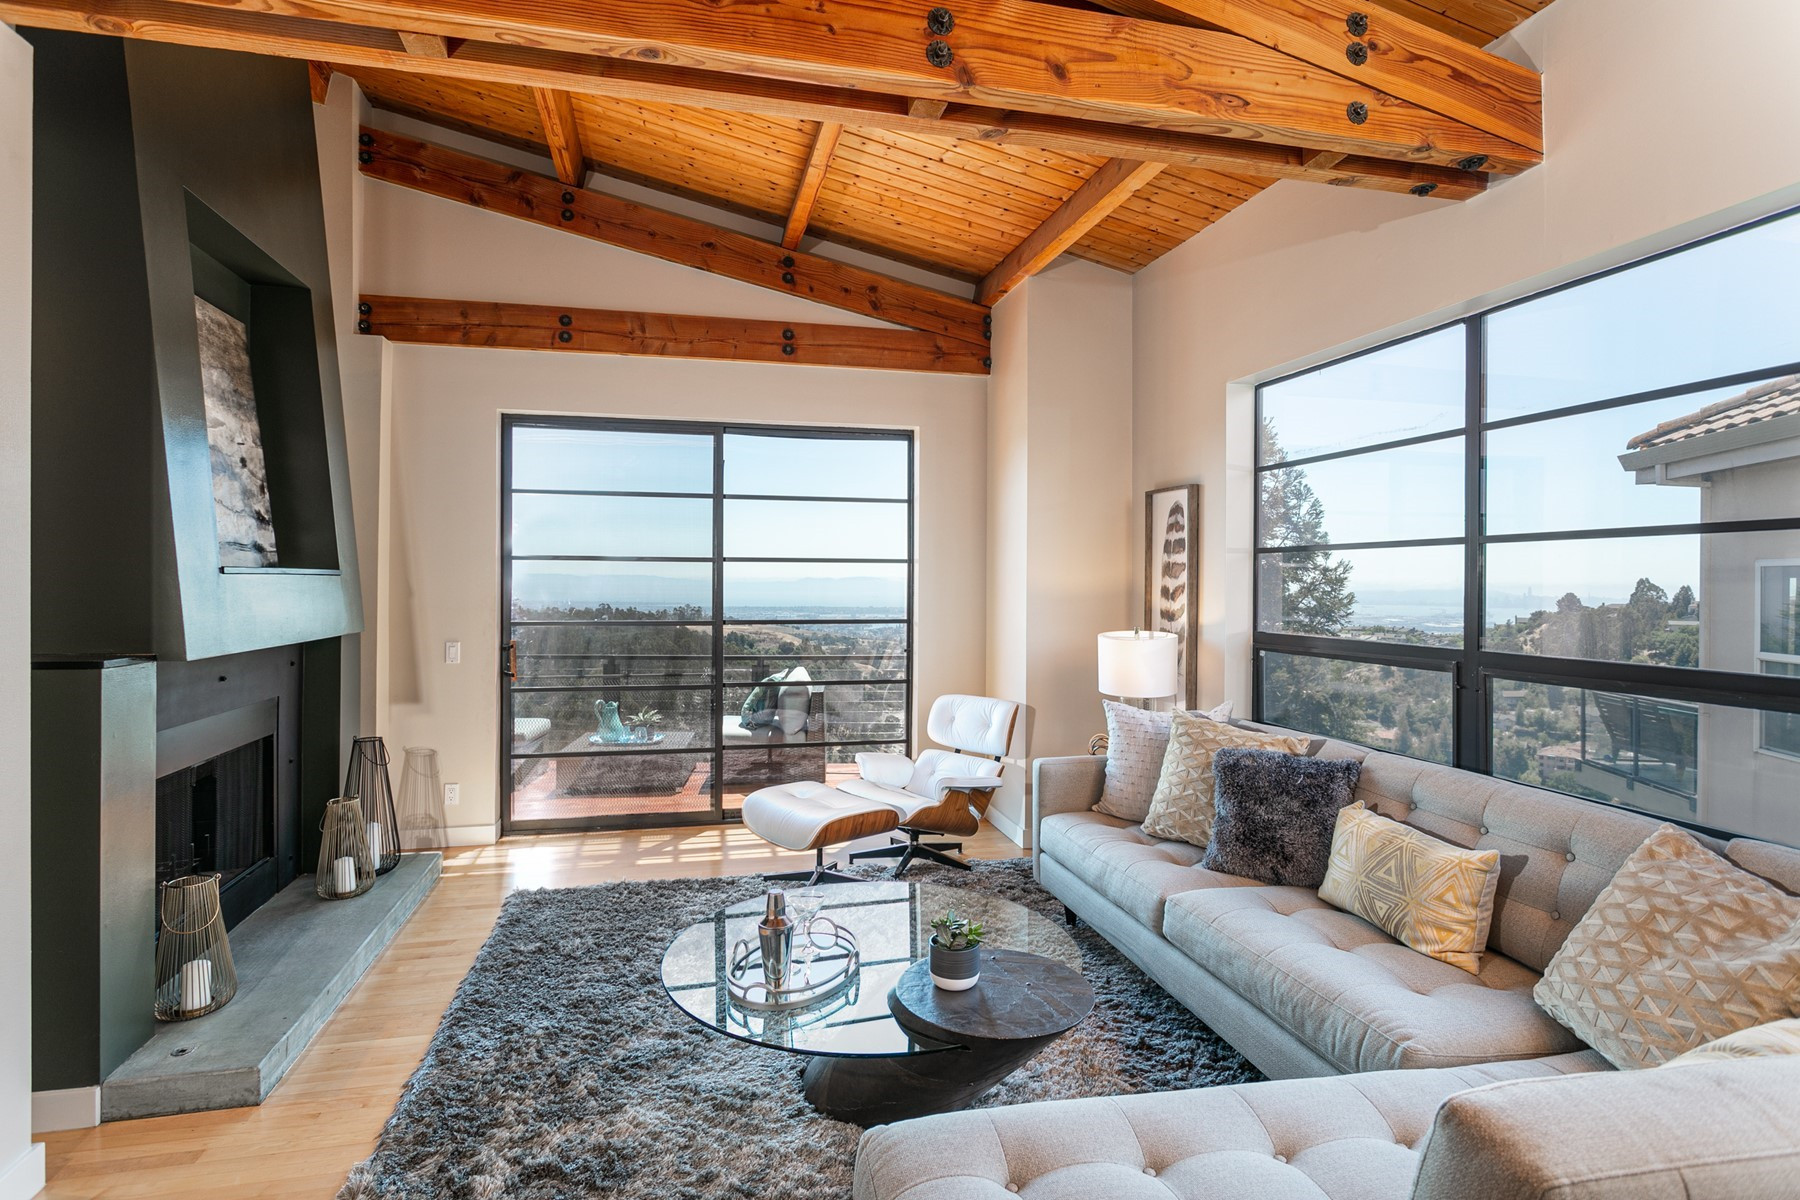 Oakland Stunner with Views